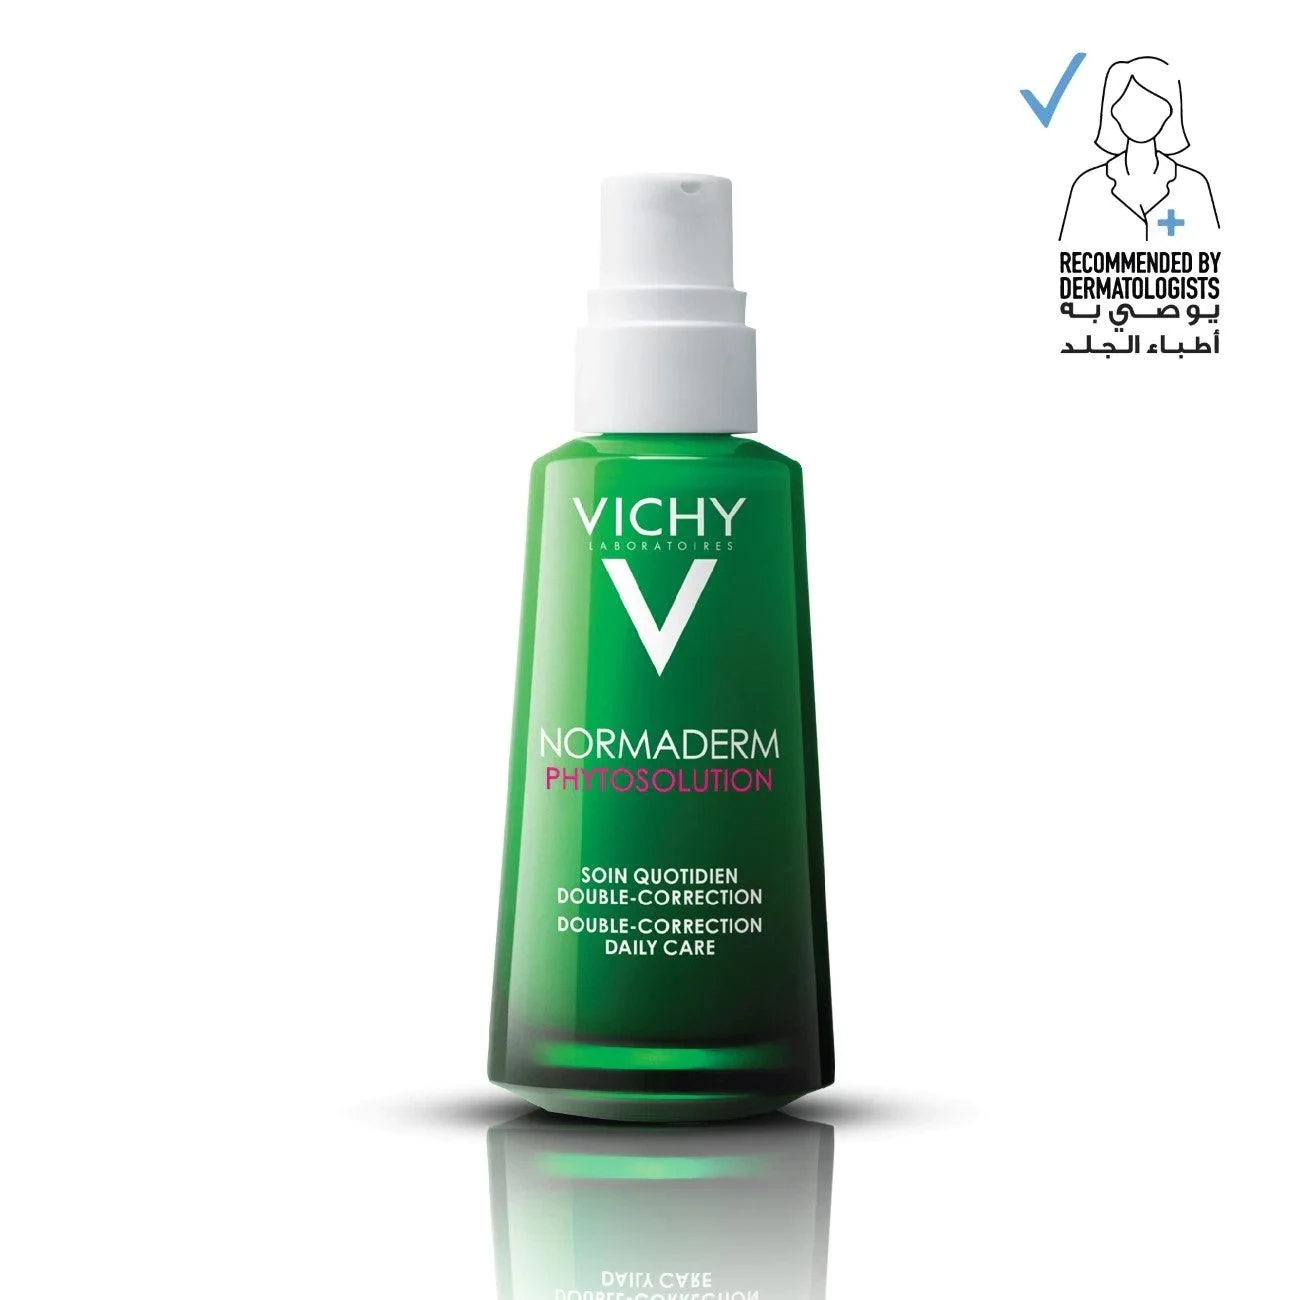 VICHY - Normaderm Phytosolution Double-Correction Daily Care